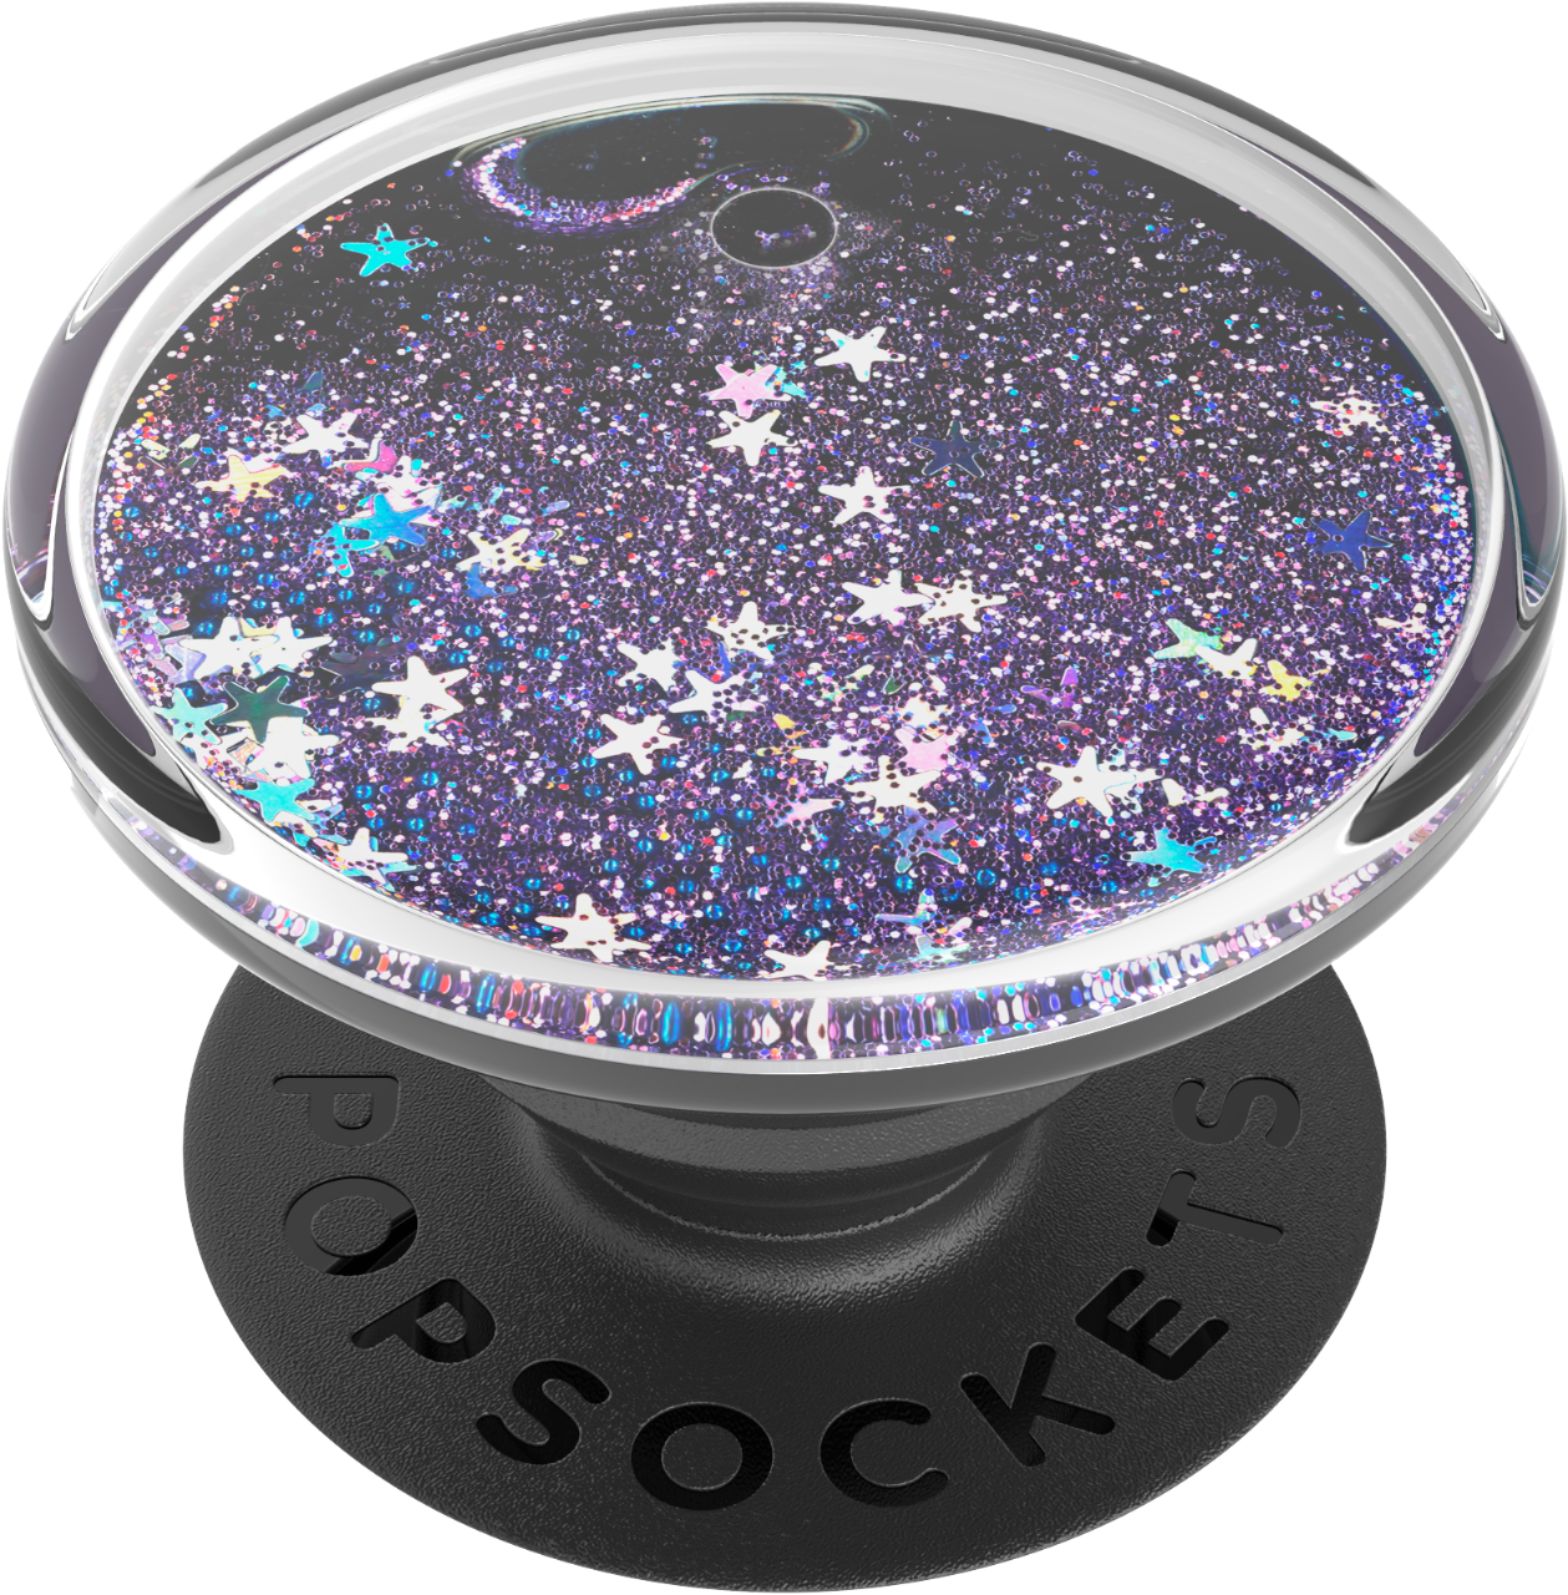 Angle View: PopSockets - PopGrip Premium Cell Phone Grip and Stand - Glitter Red